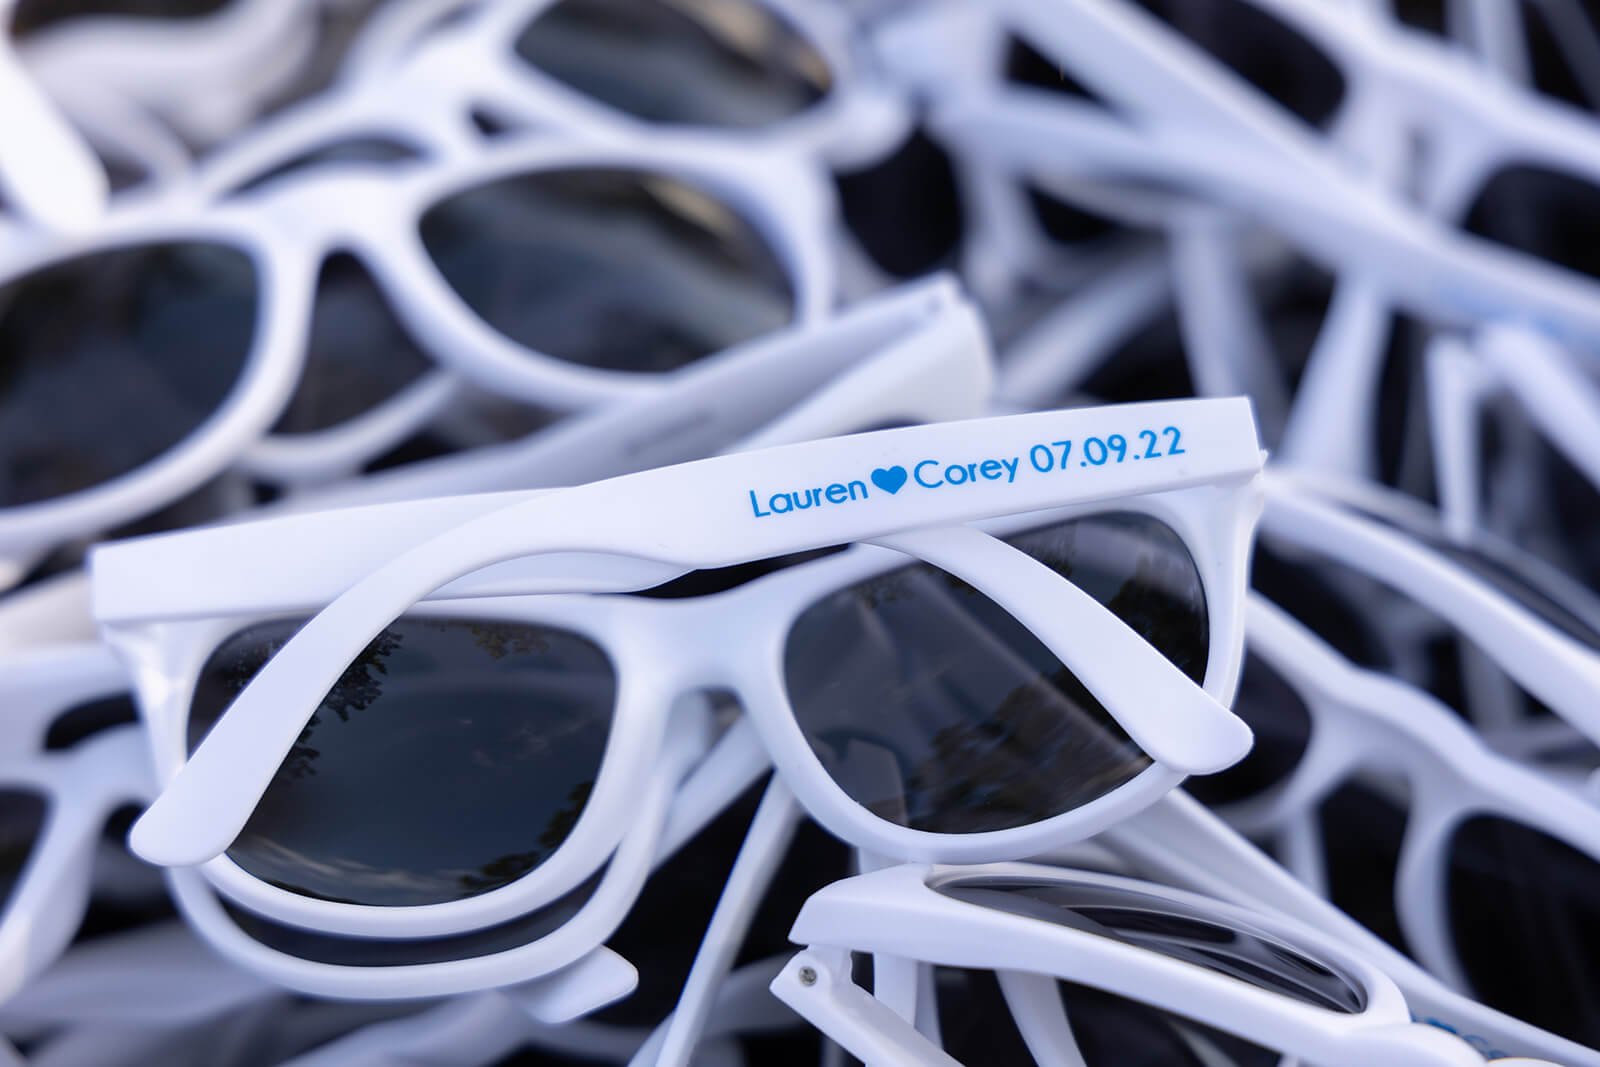 Customized sunglasses and flip-flops for guests at an outdoor wedding